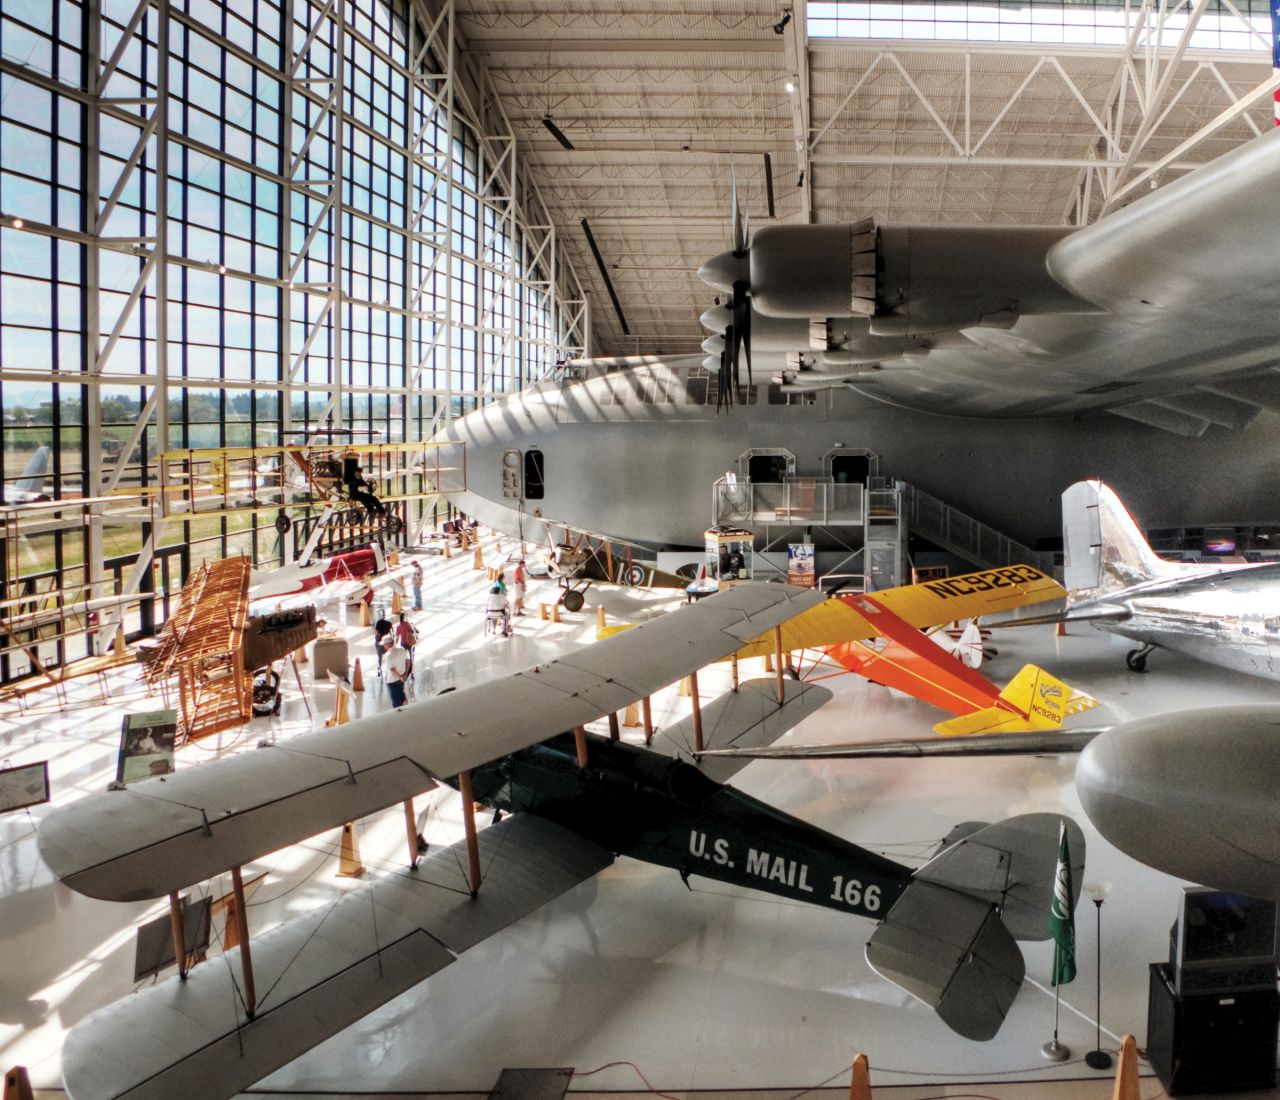 The media nicknamed it the Spruce Goose because it's made of wood. But this seaplane with the wingspan of a football field was orginially called the HK-1 and then later the H-4 Hercules when it was developed in the 1940s. It's now living at the <a href="http://www.evergreenmuseum.org/" target="_blank" target="_blank">Evergreen Aviation & Space Museum</a> in McMinnville, Oregon.